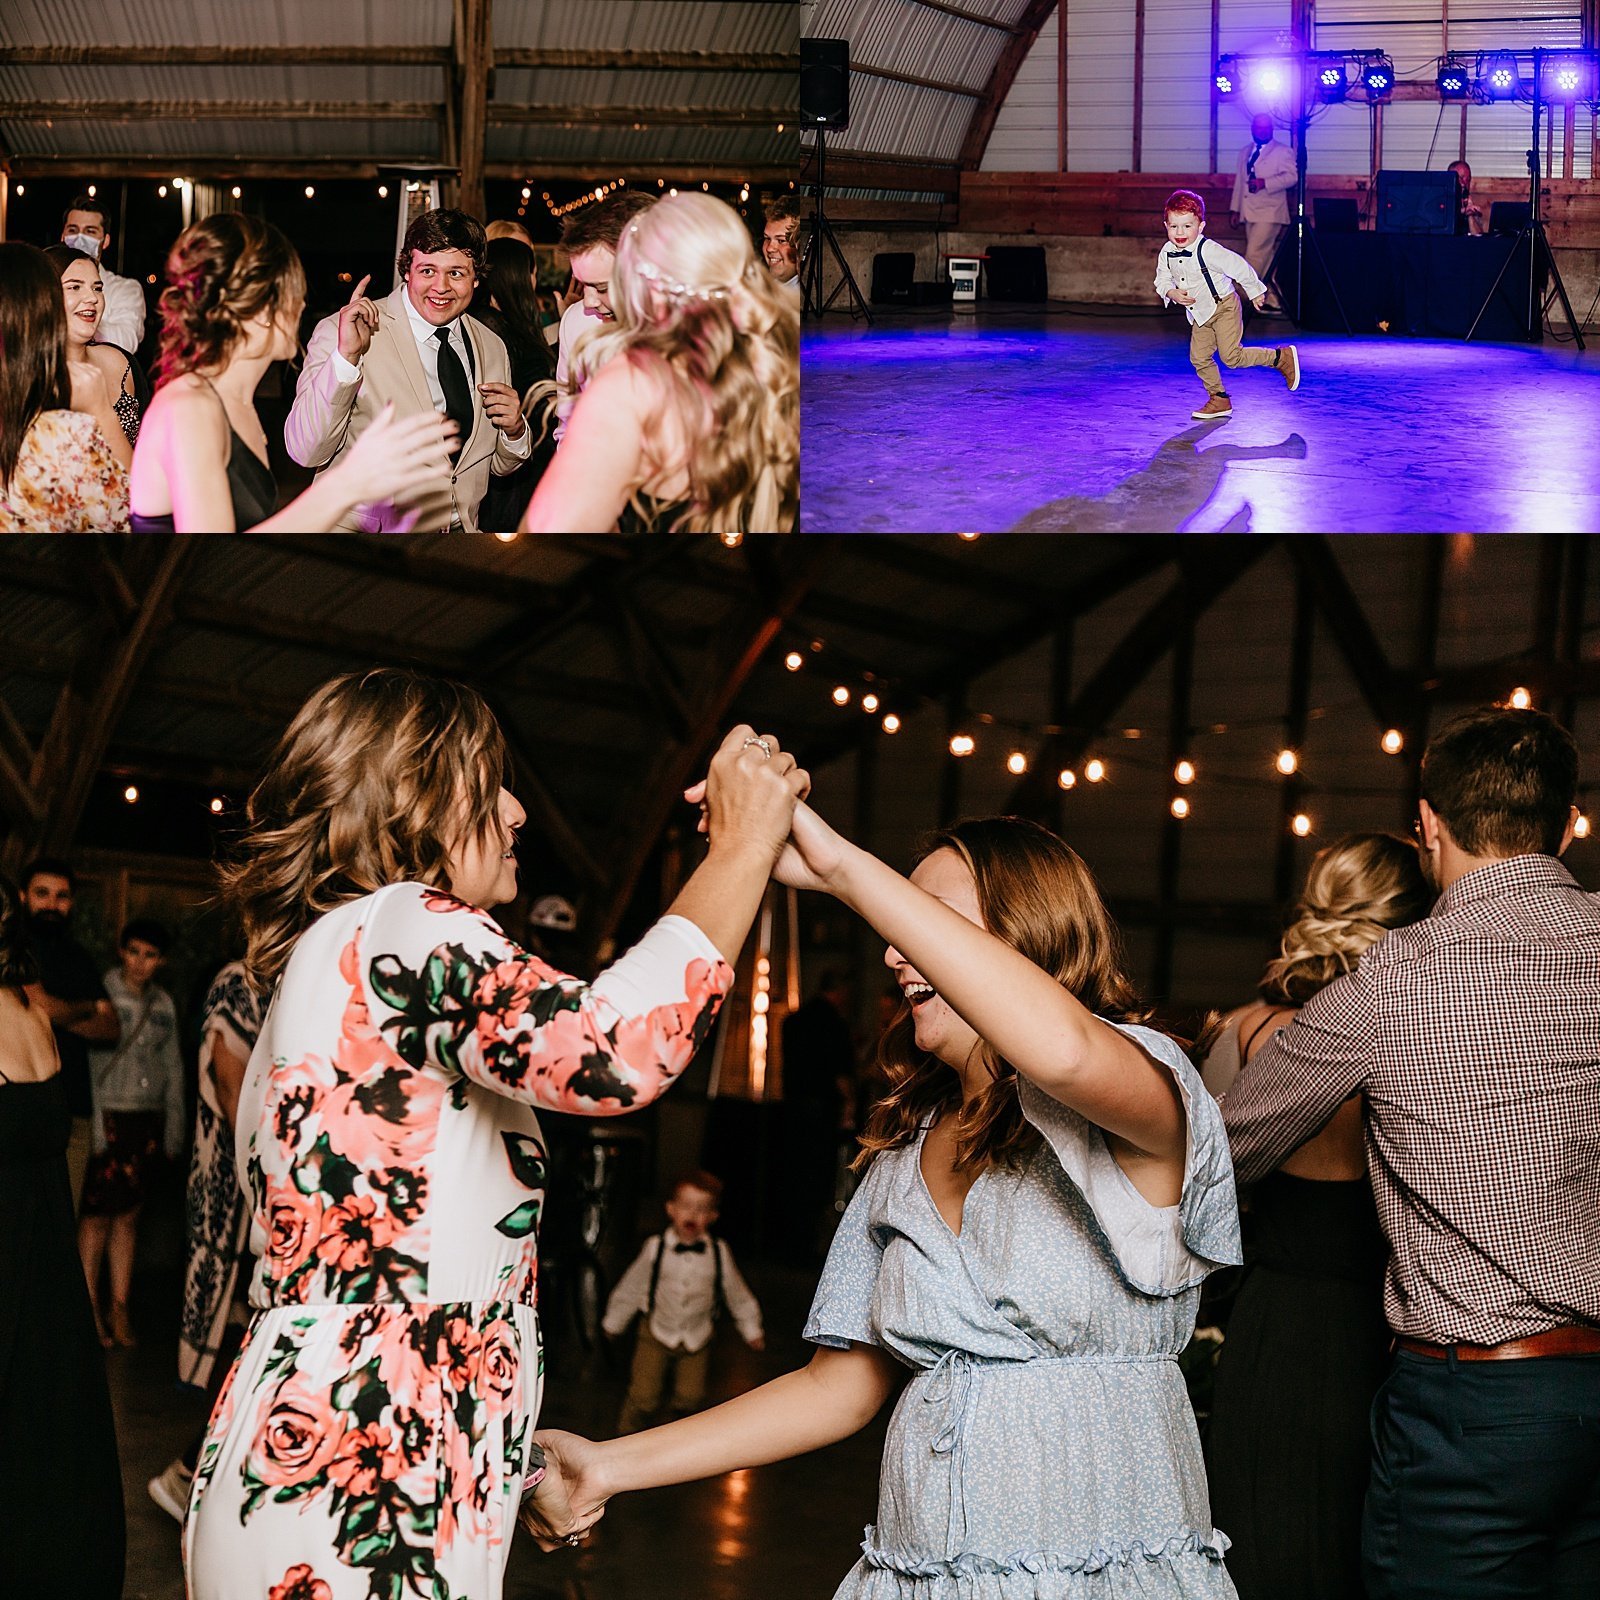  Guests dancing at a wedding reception in Minnesota  